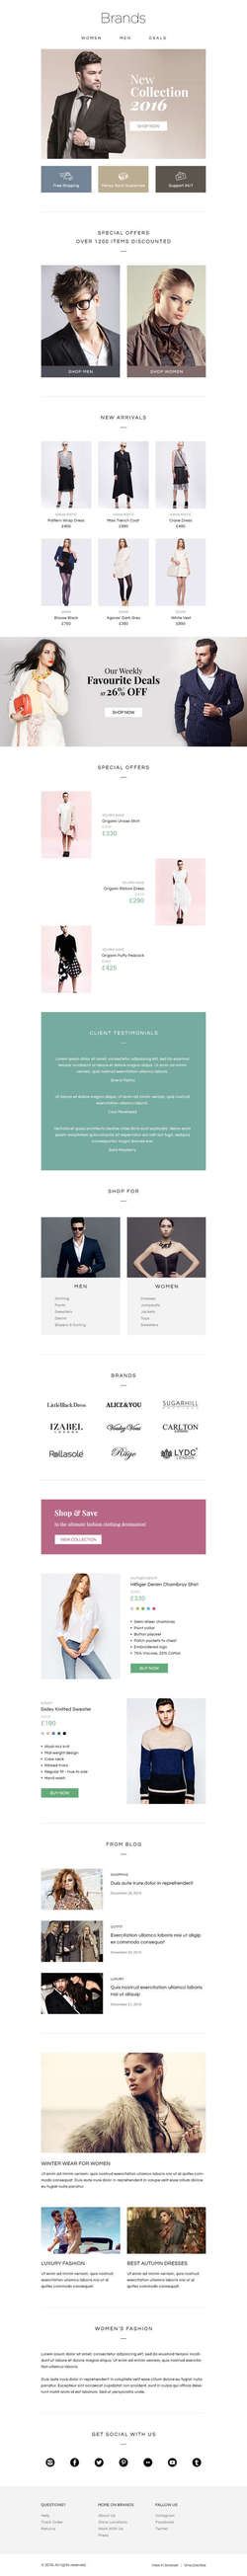 Brands - eCommerce Responsive Email Template